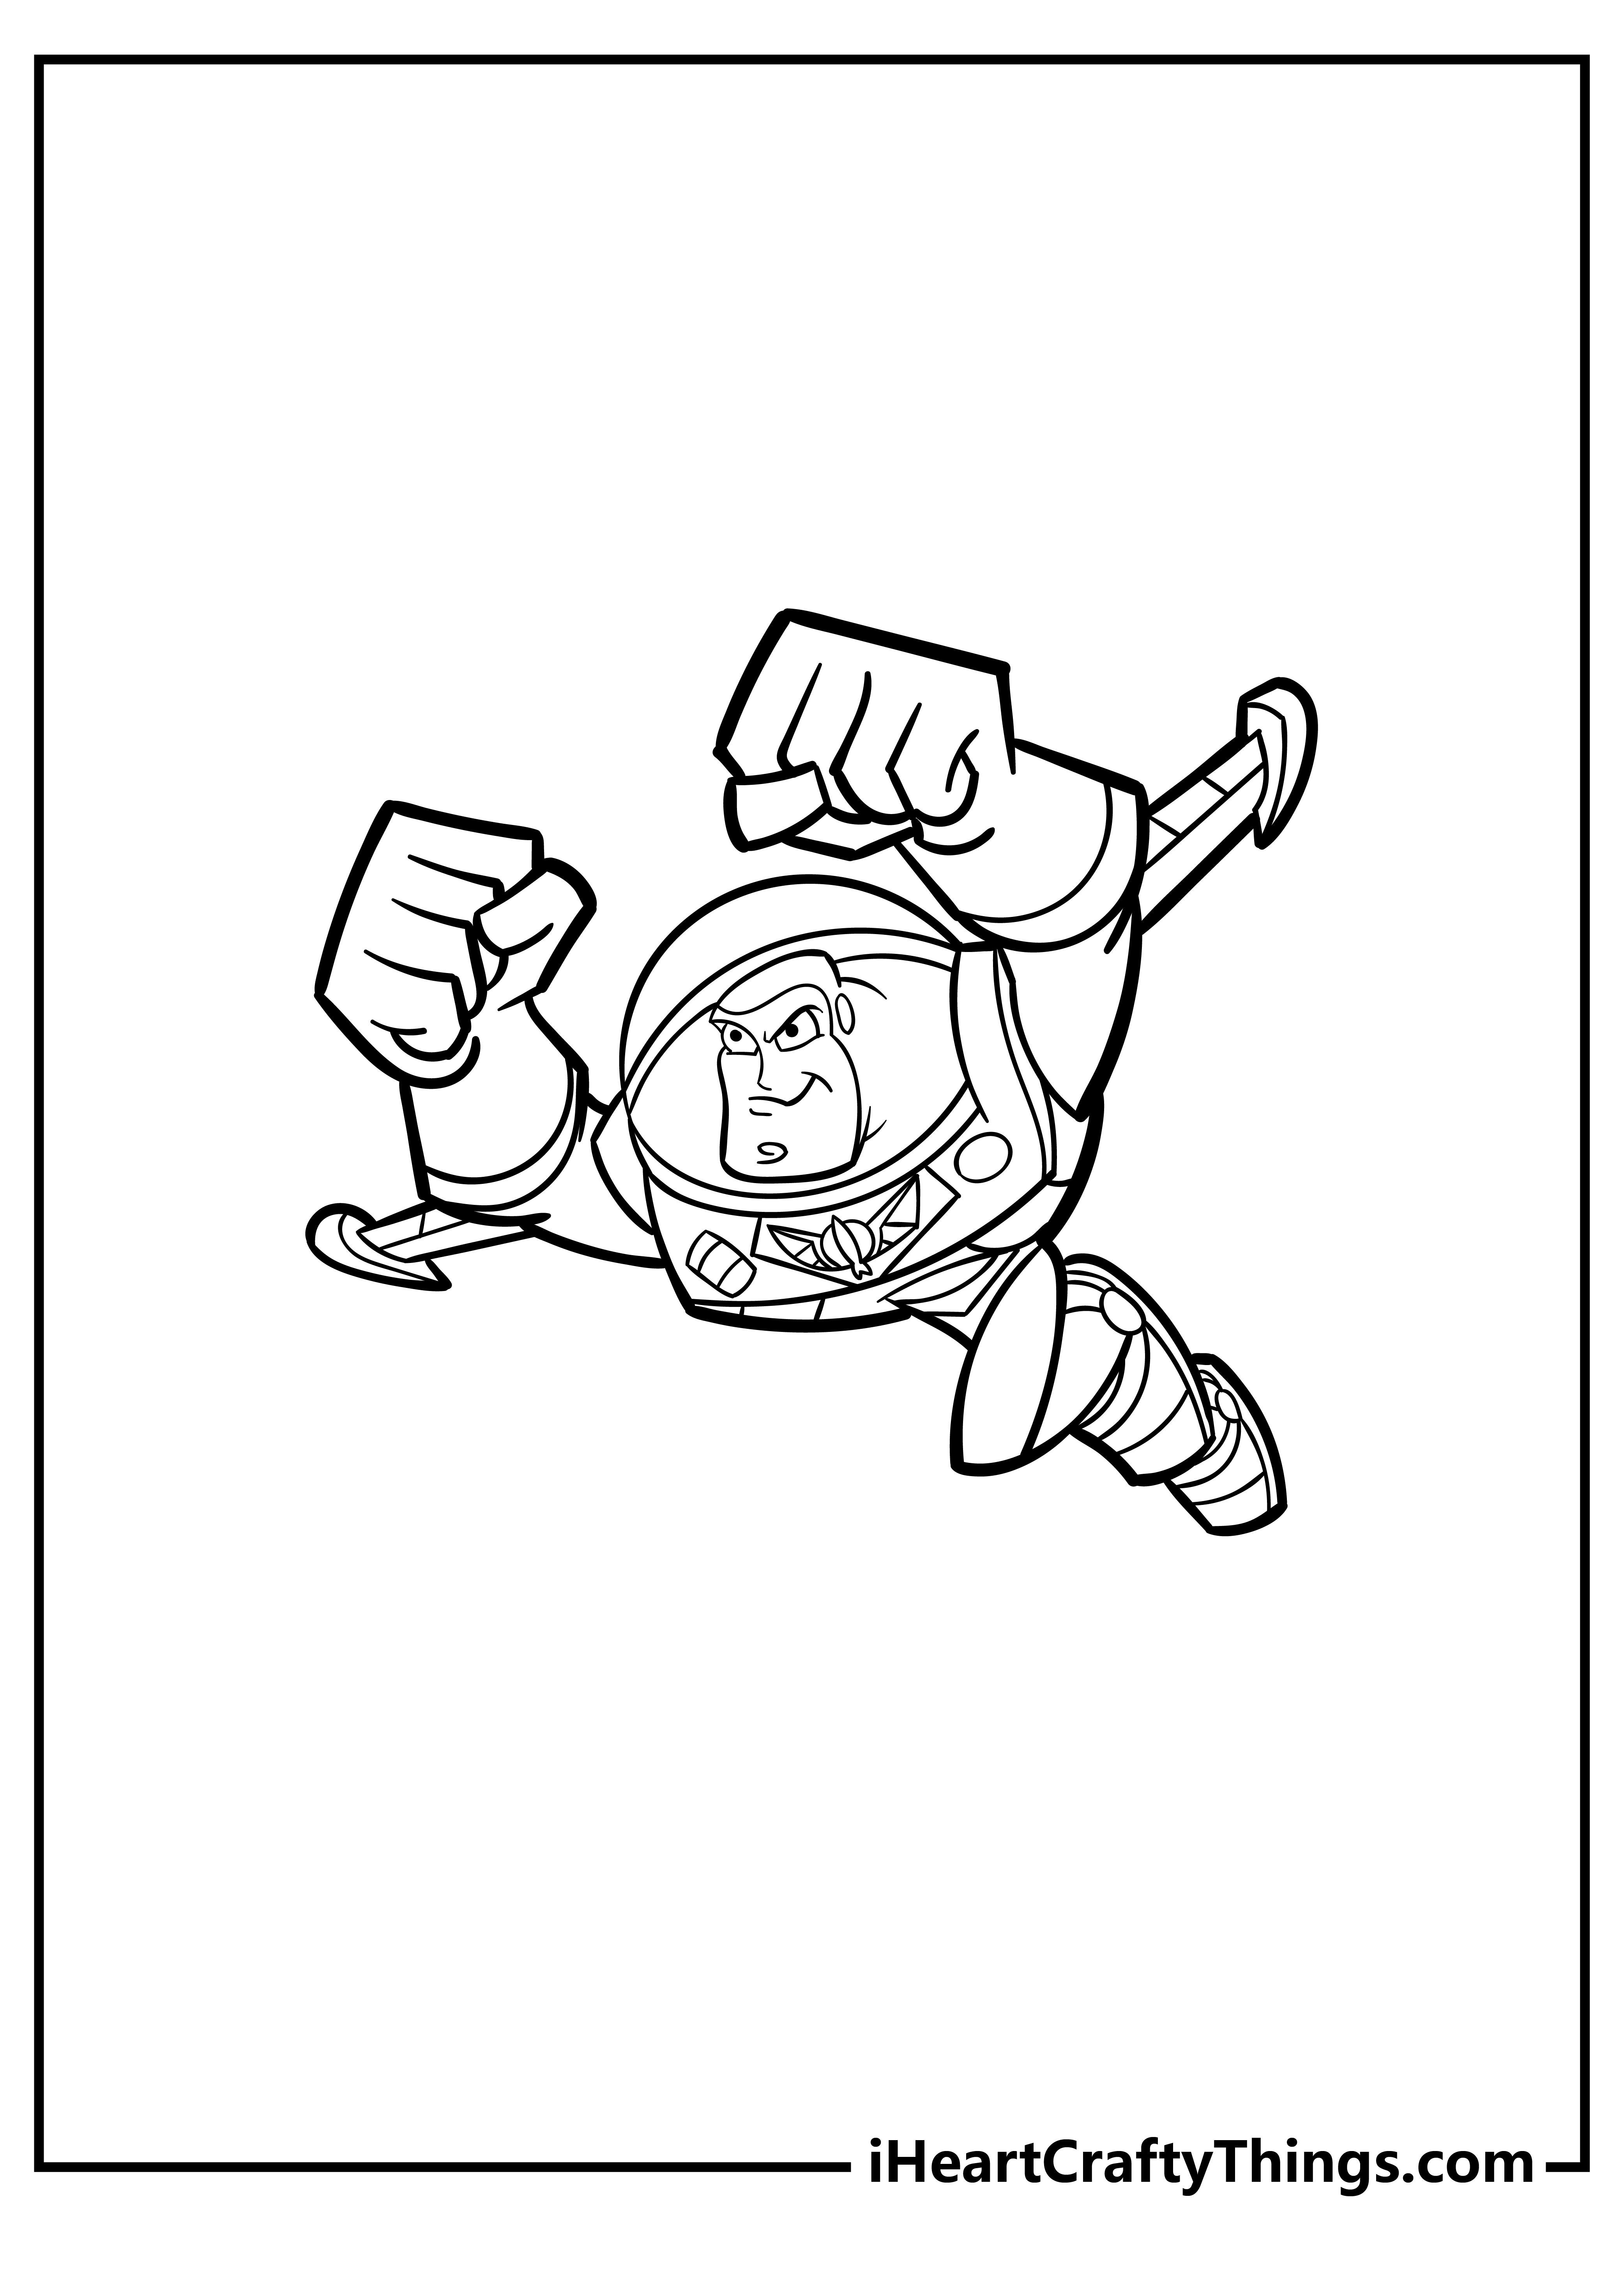 Buzz Lightyear Cartoon Coloring Pages for adults free printable